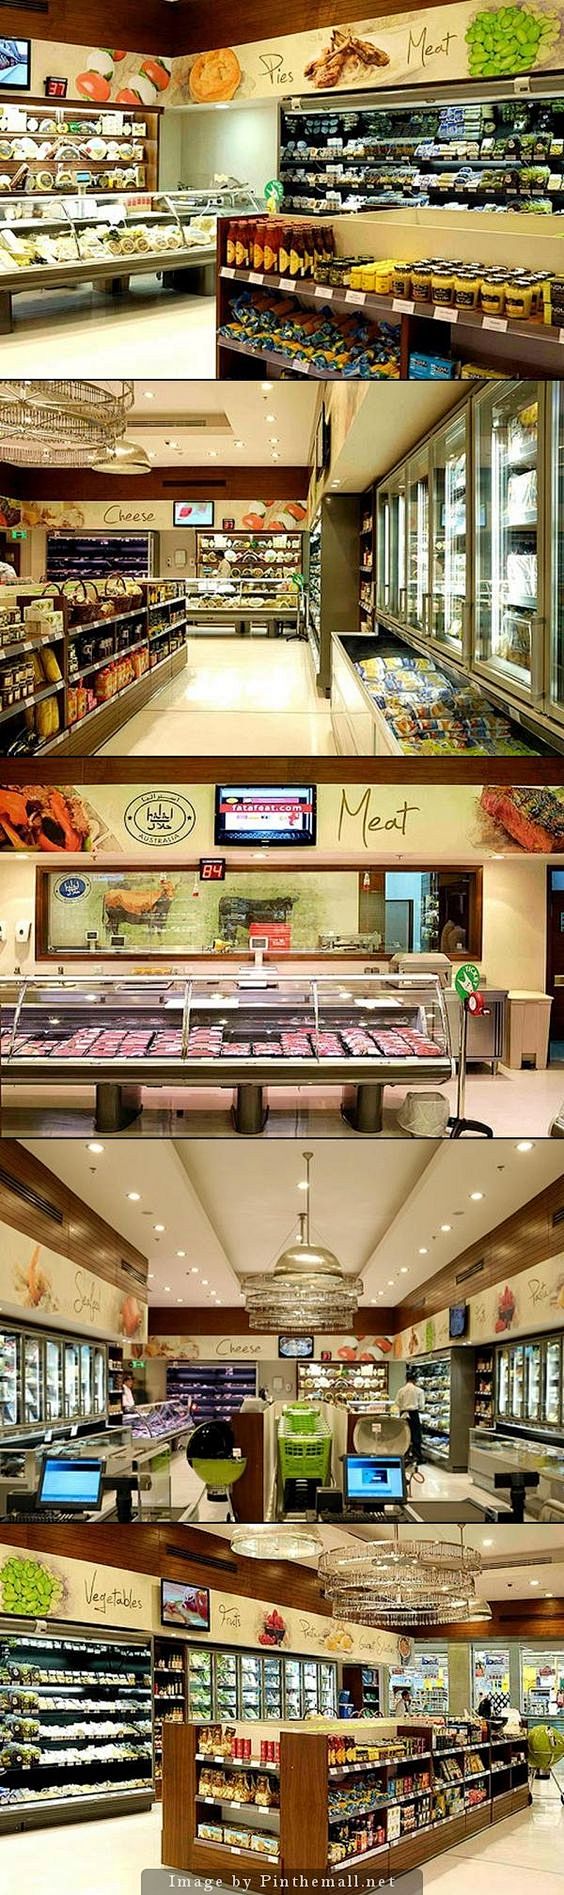 Clean Retail Grocery...